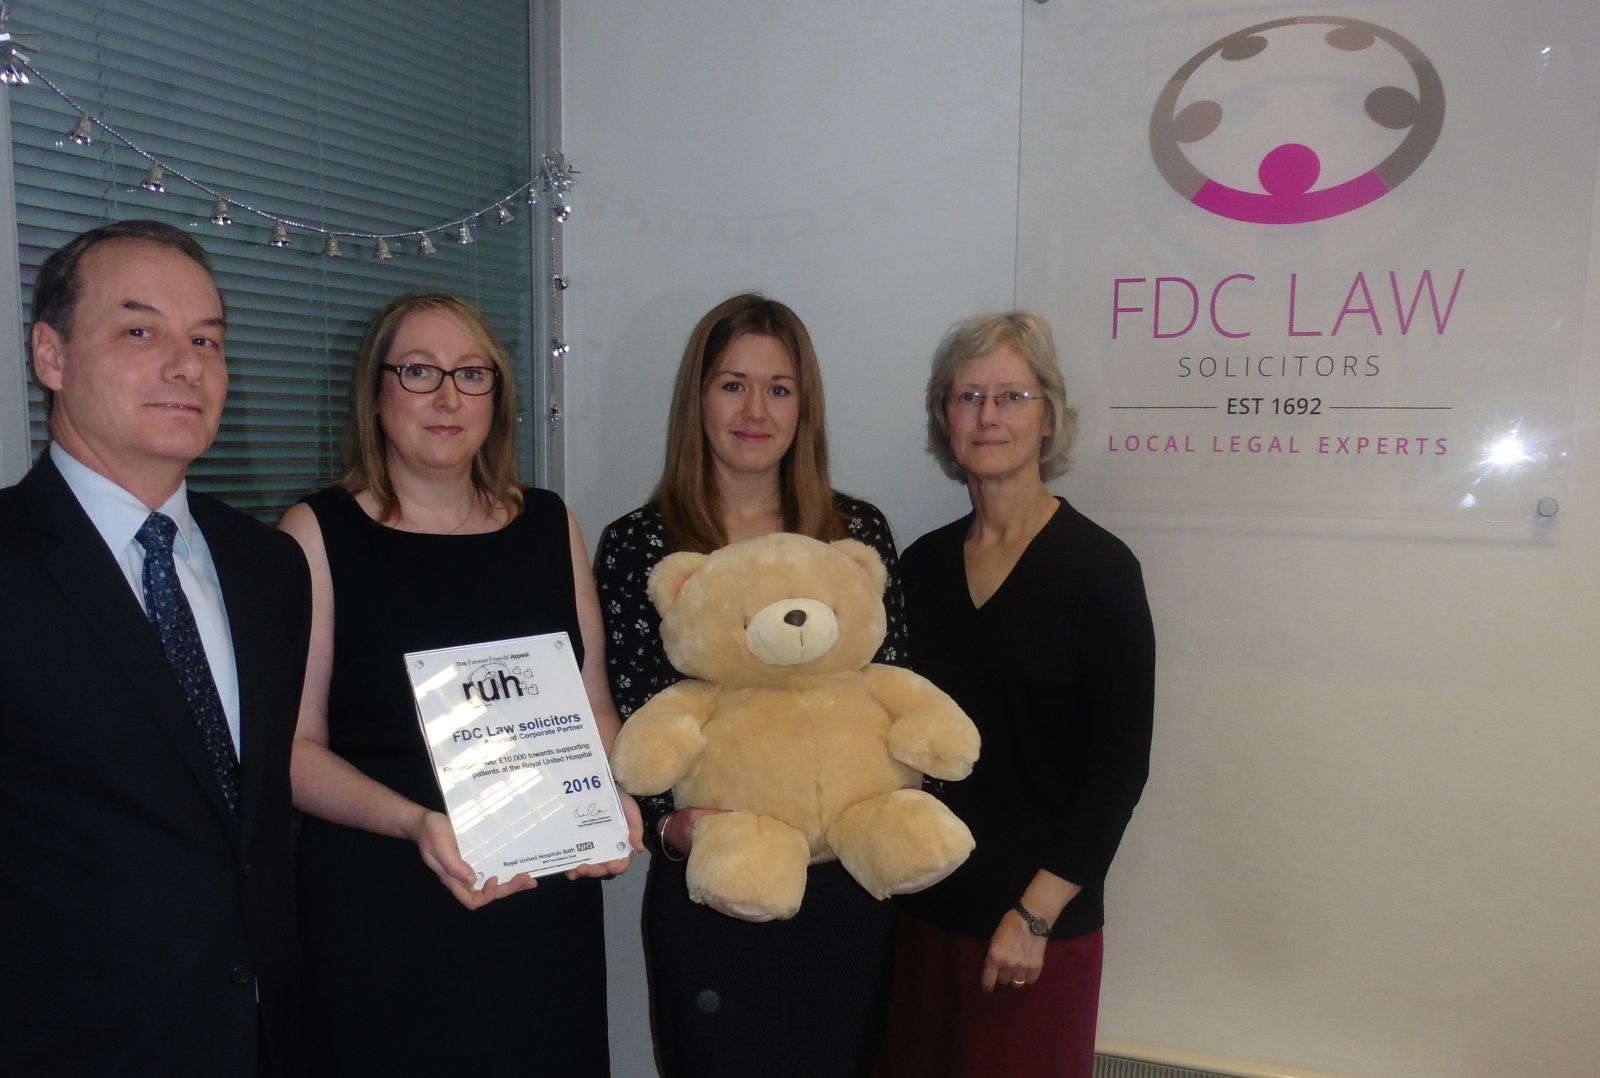 Presentation of plaque to FDC Law. Group of 4 people holding palqye and teddy bear, in FDC Law office